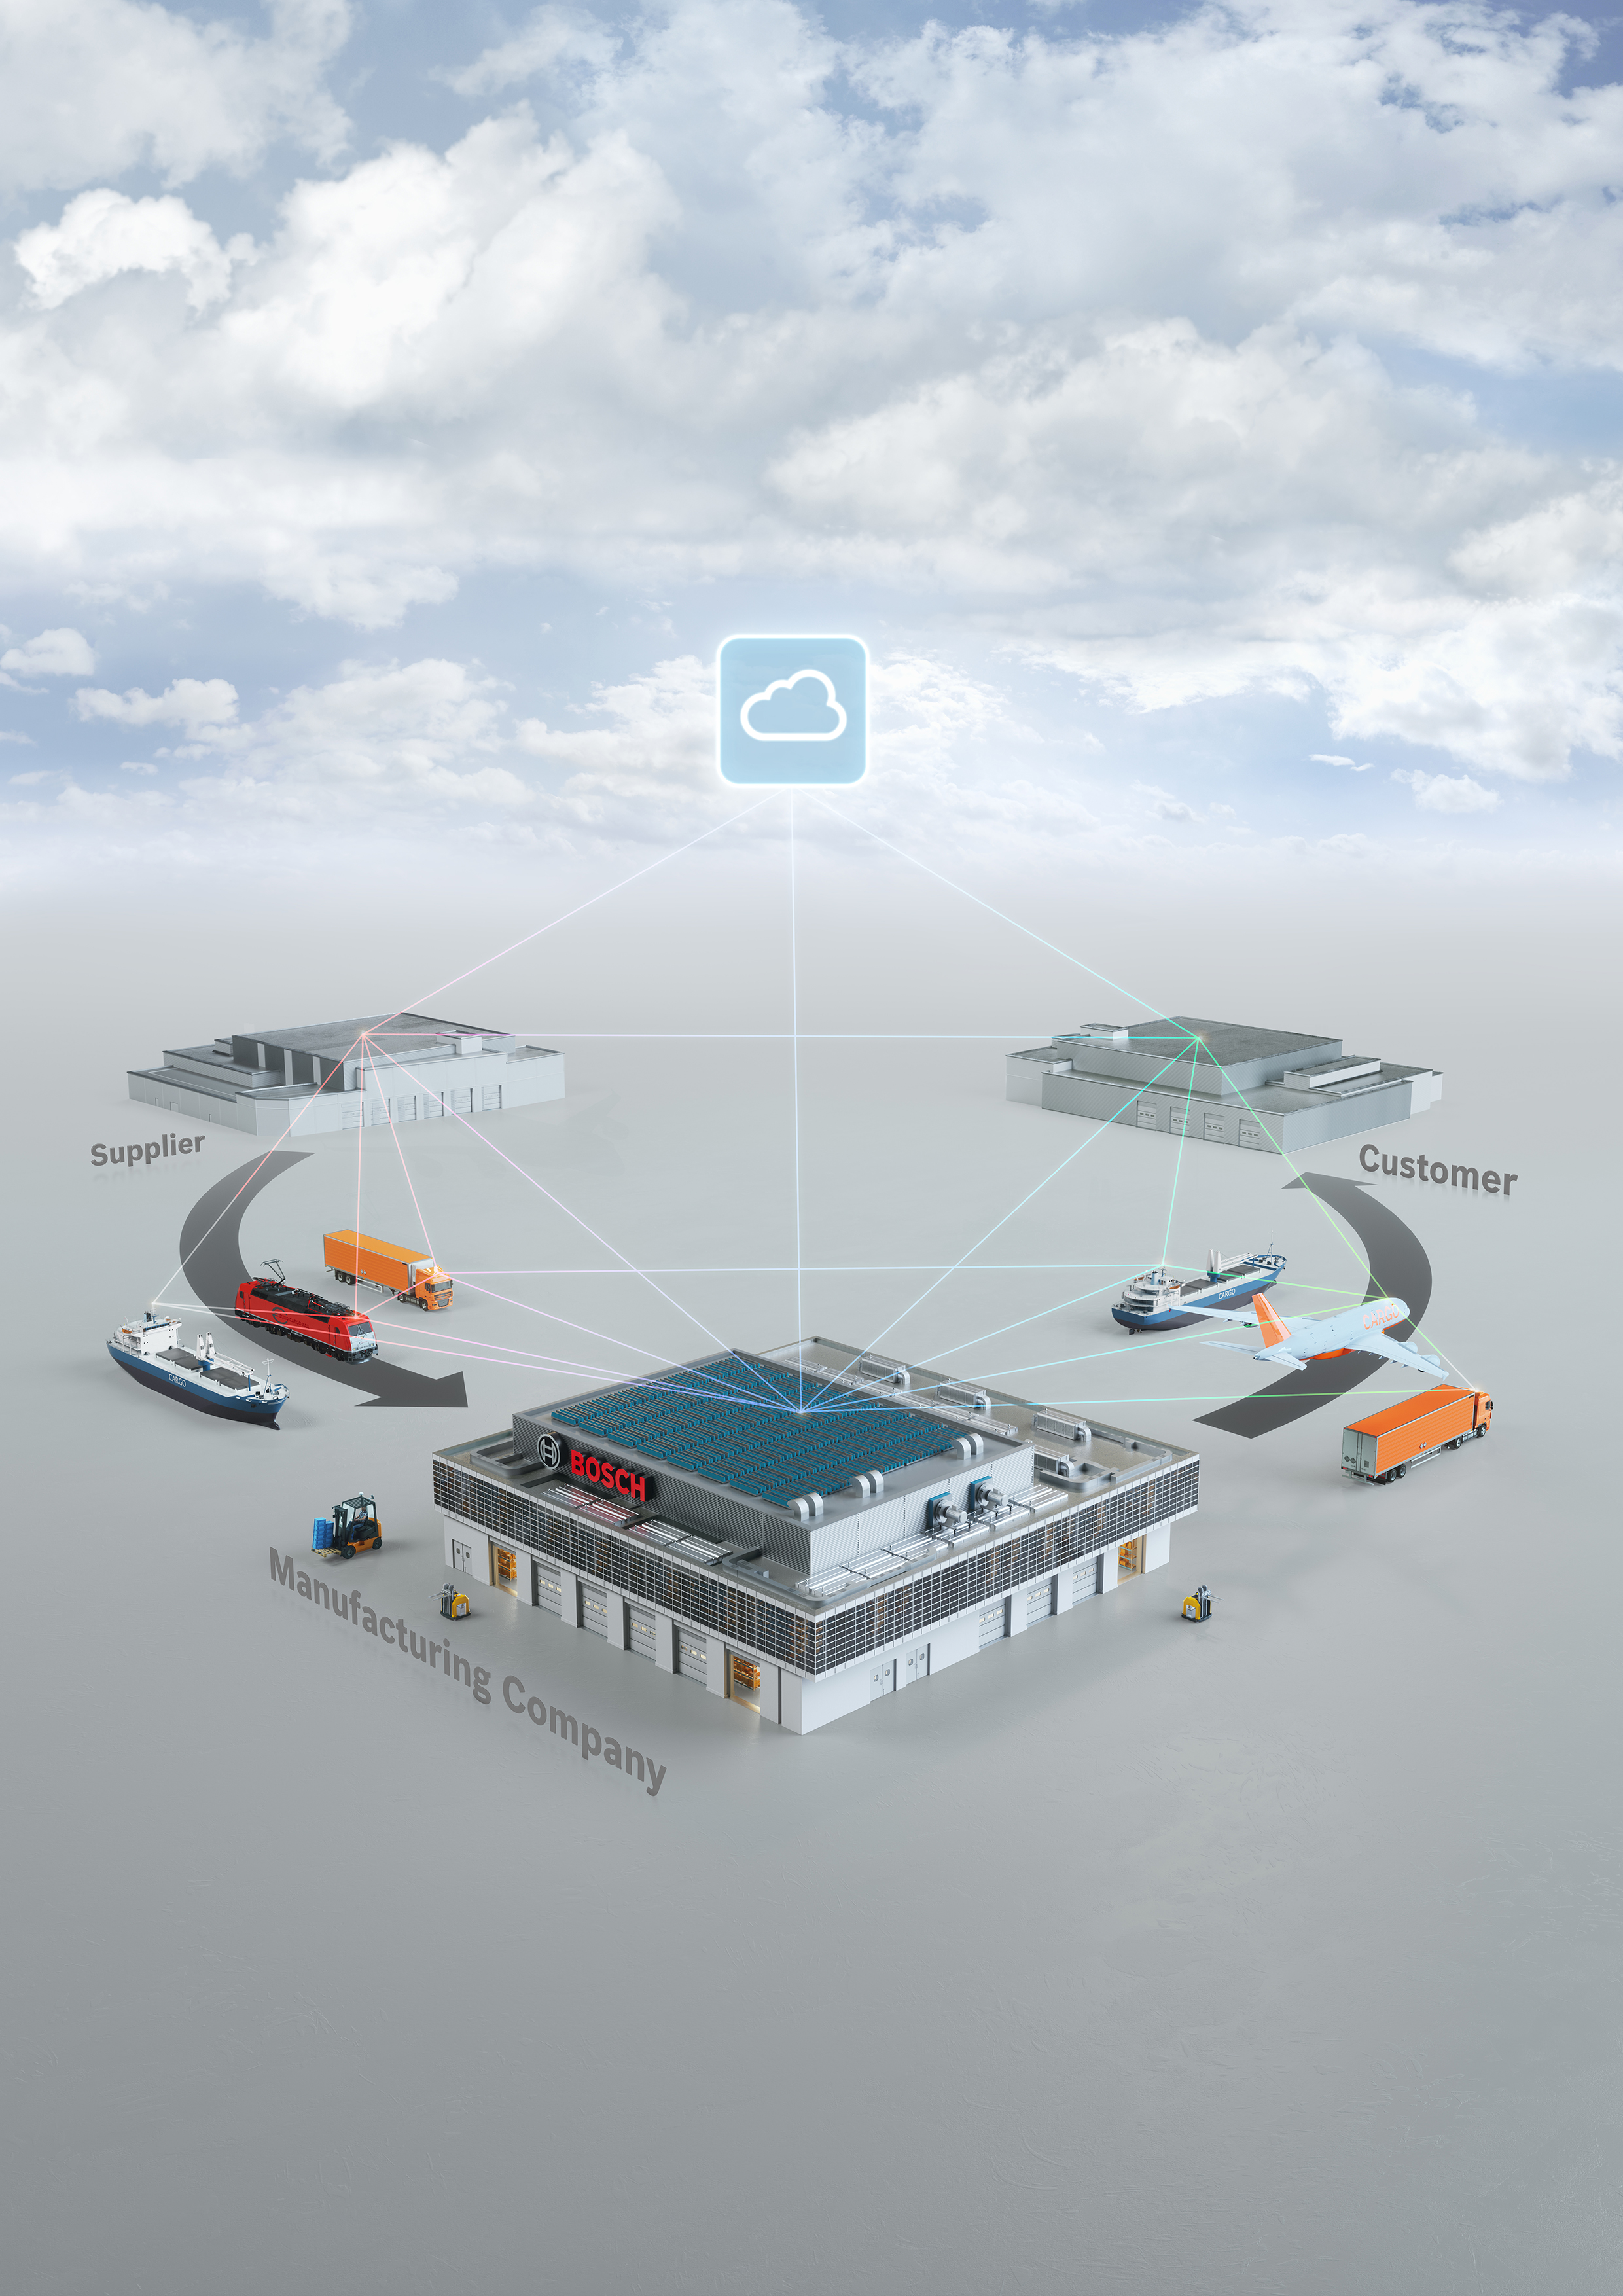 Bosch continues to expand its digital supply chains